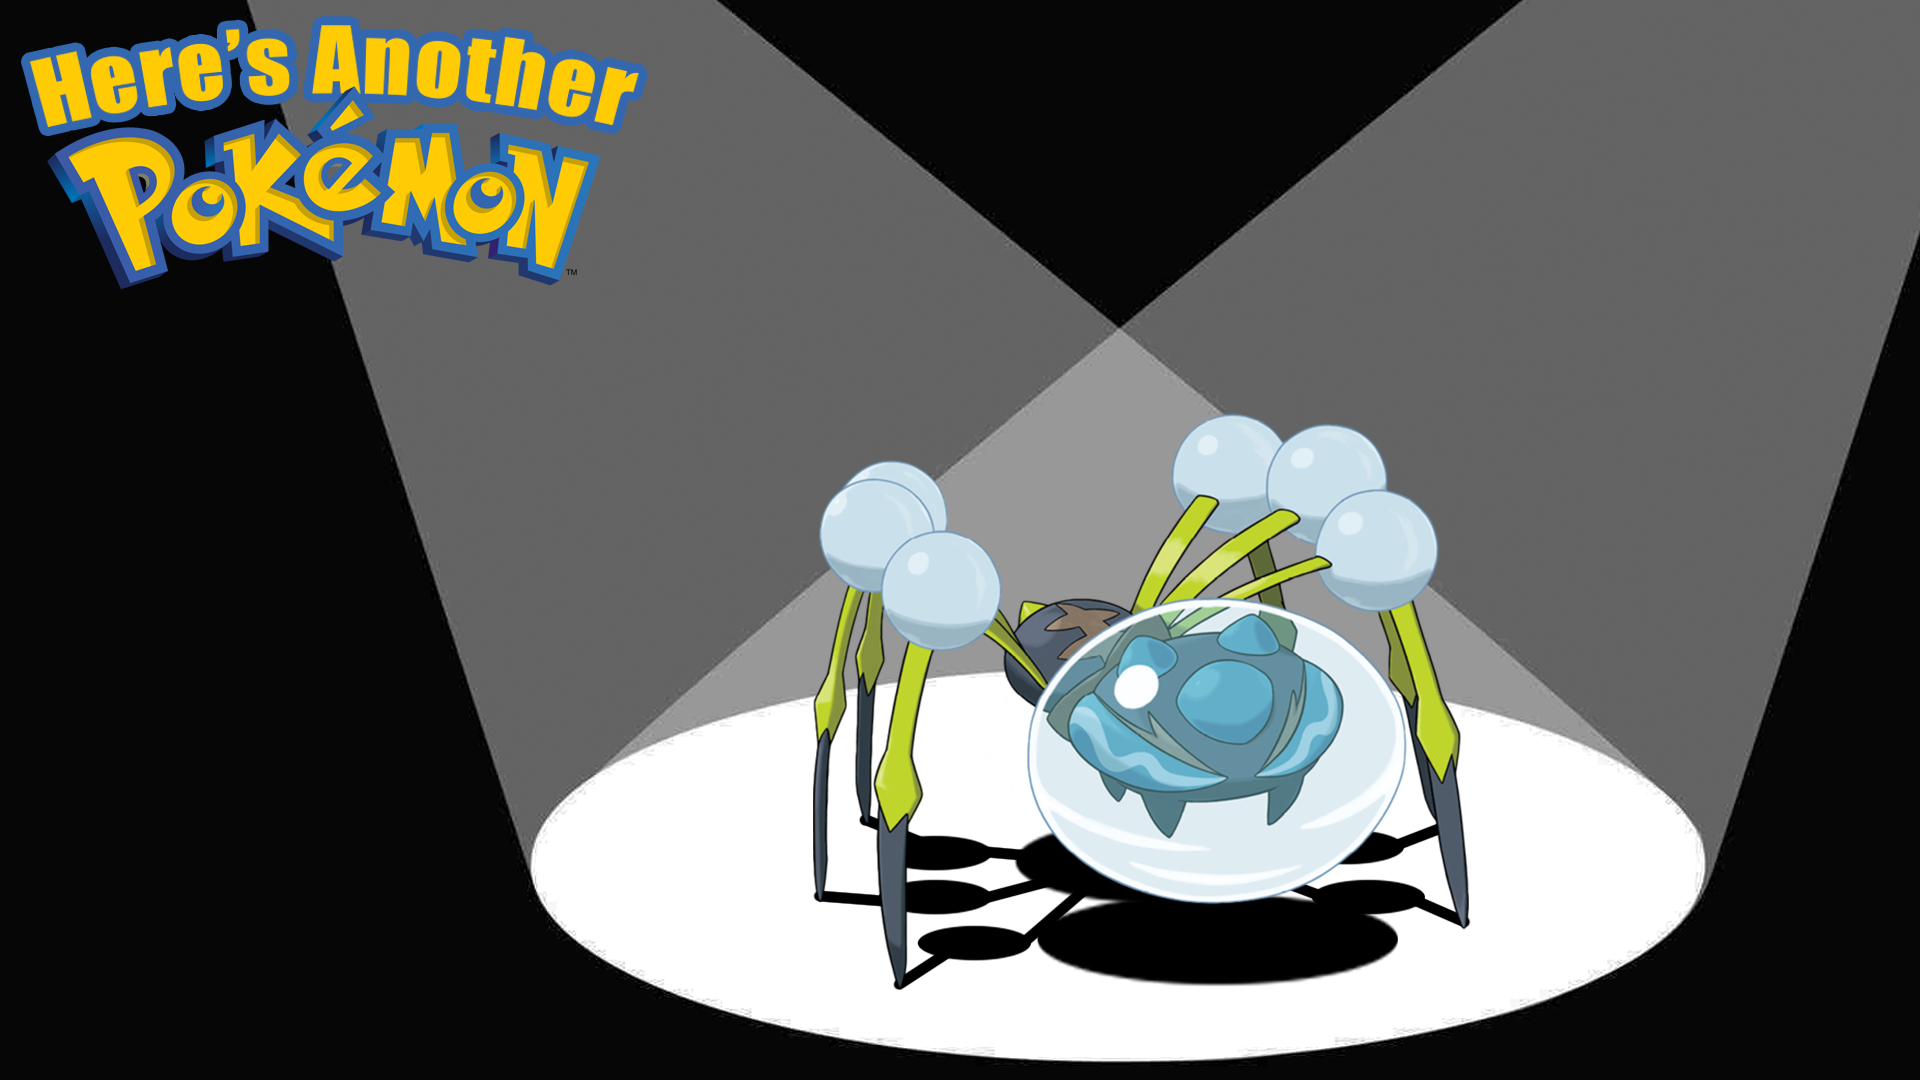 Araquanid Drowns Small Pokemon In Its Water Bubble Helmet